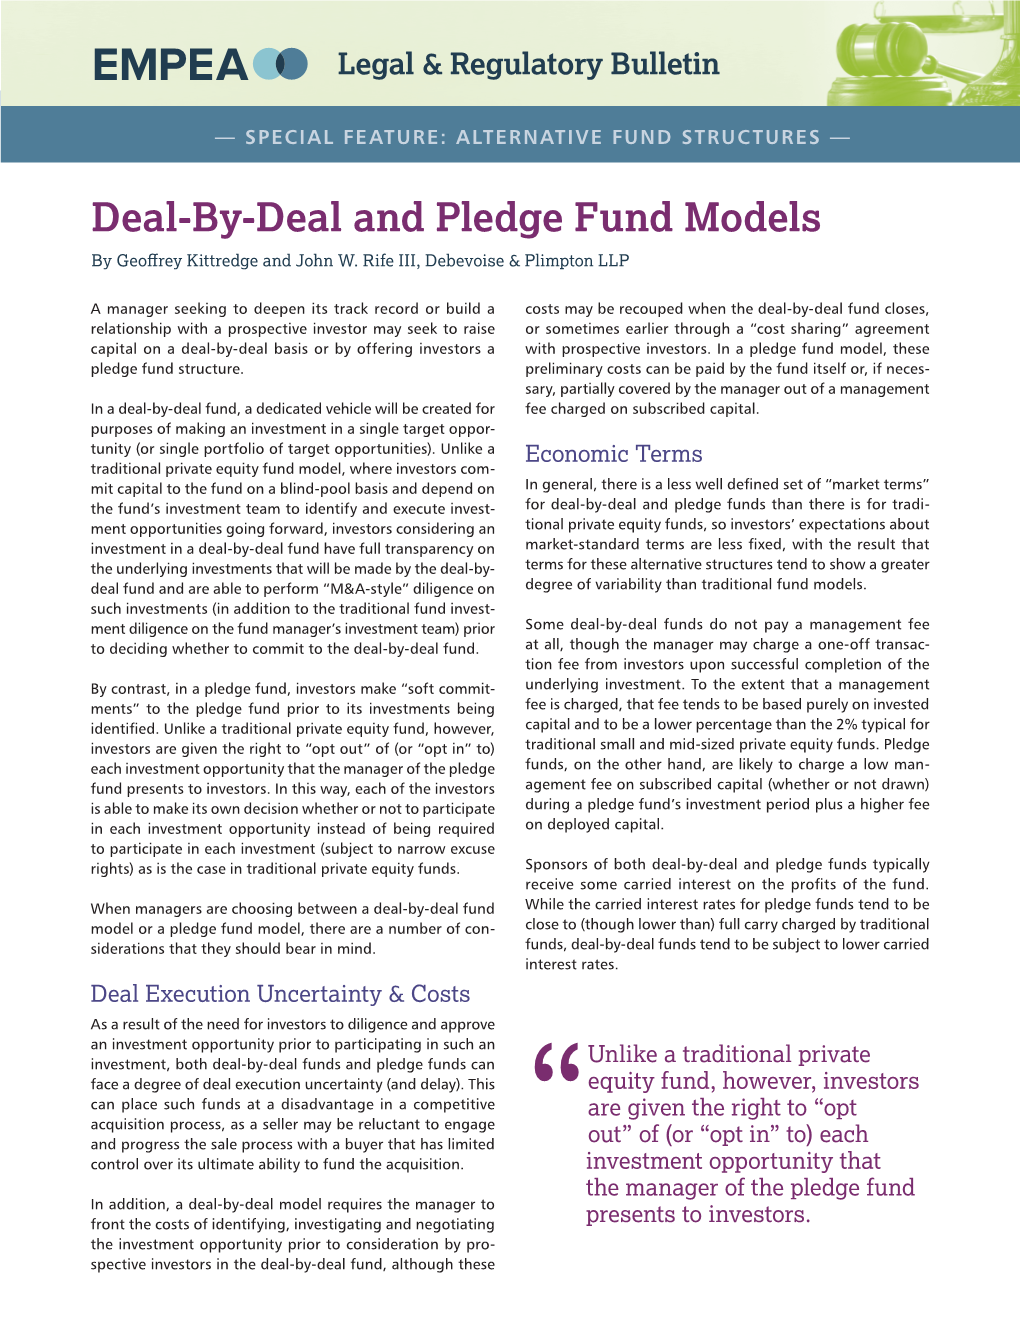 Deal-By-Deal and Pledge Fund Models by Geoffrey Kittredge and John W